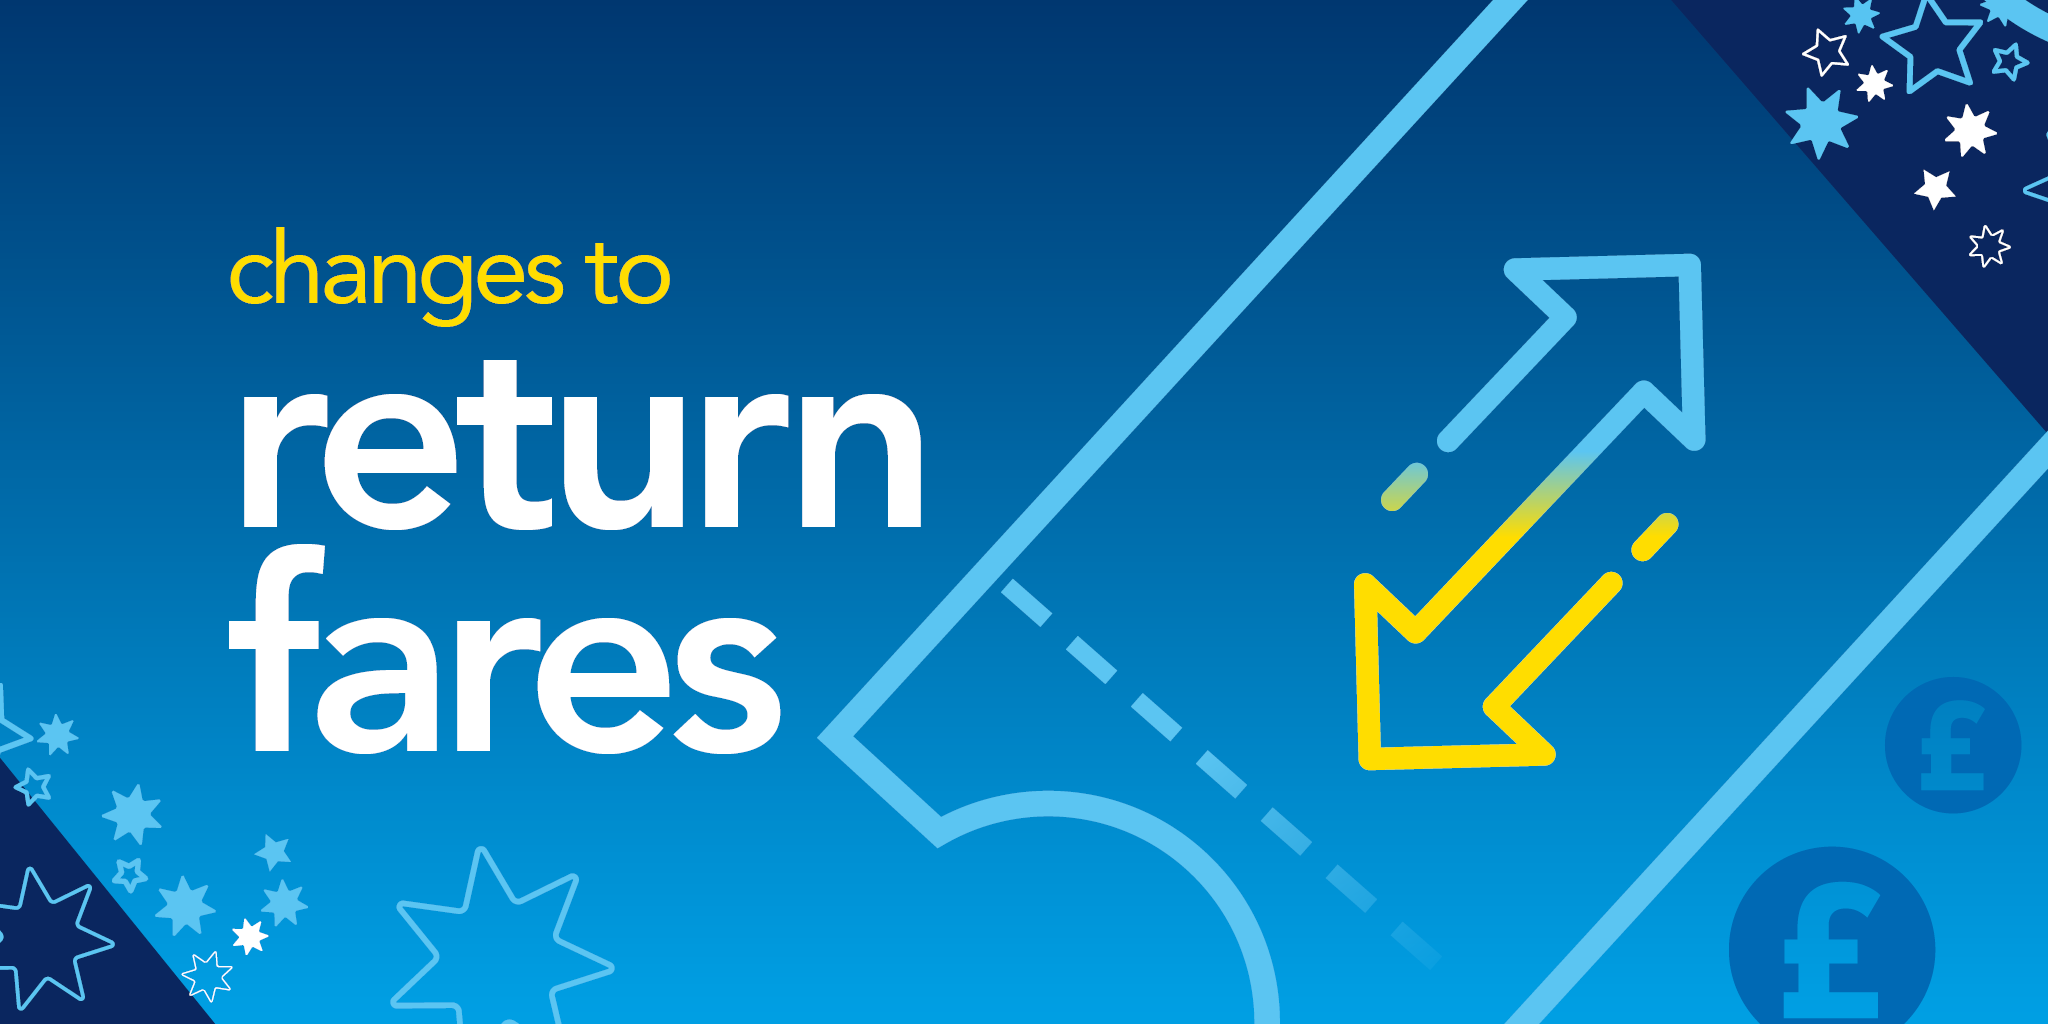 changes to return fares image